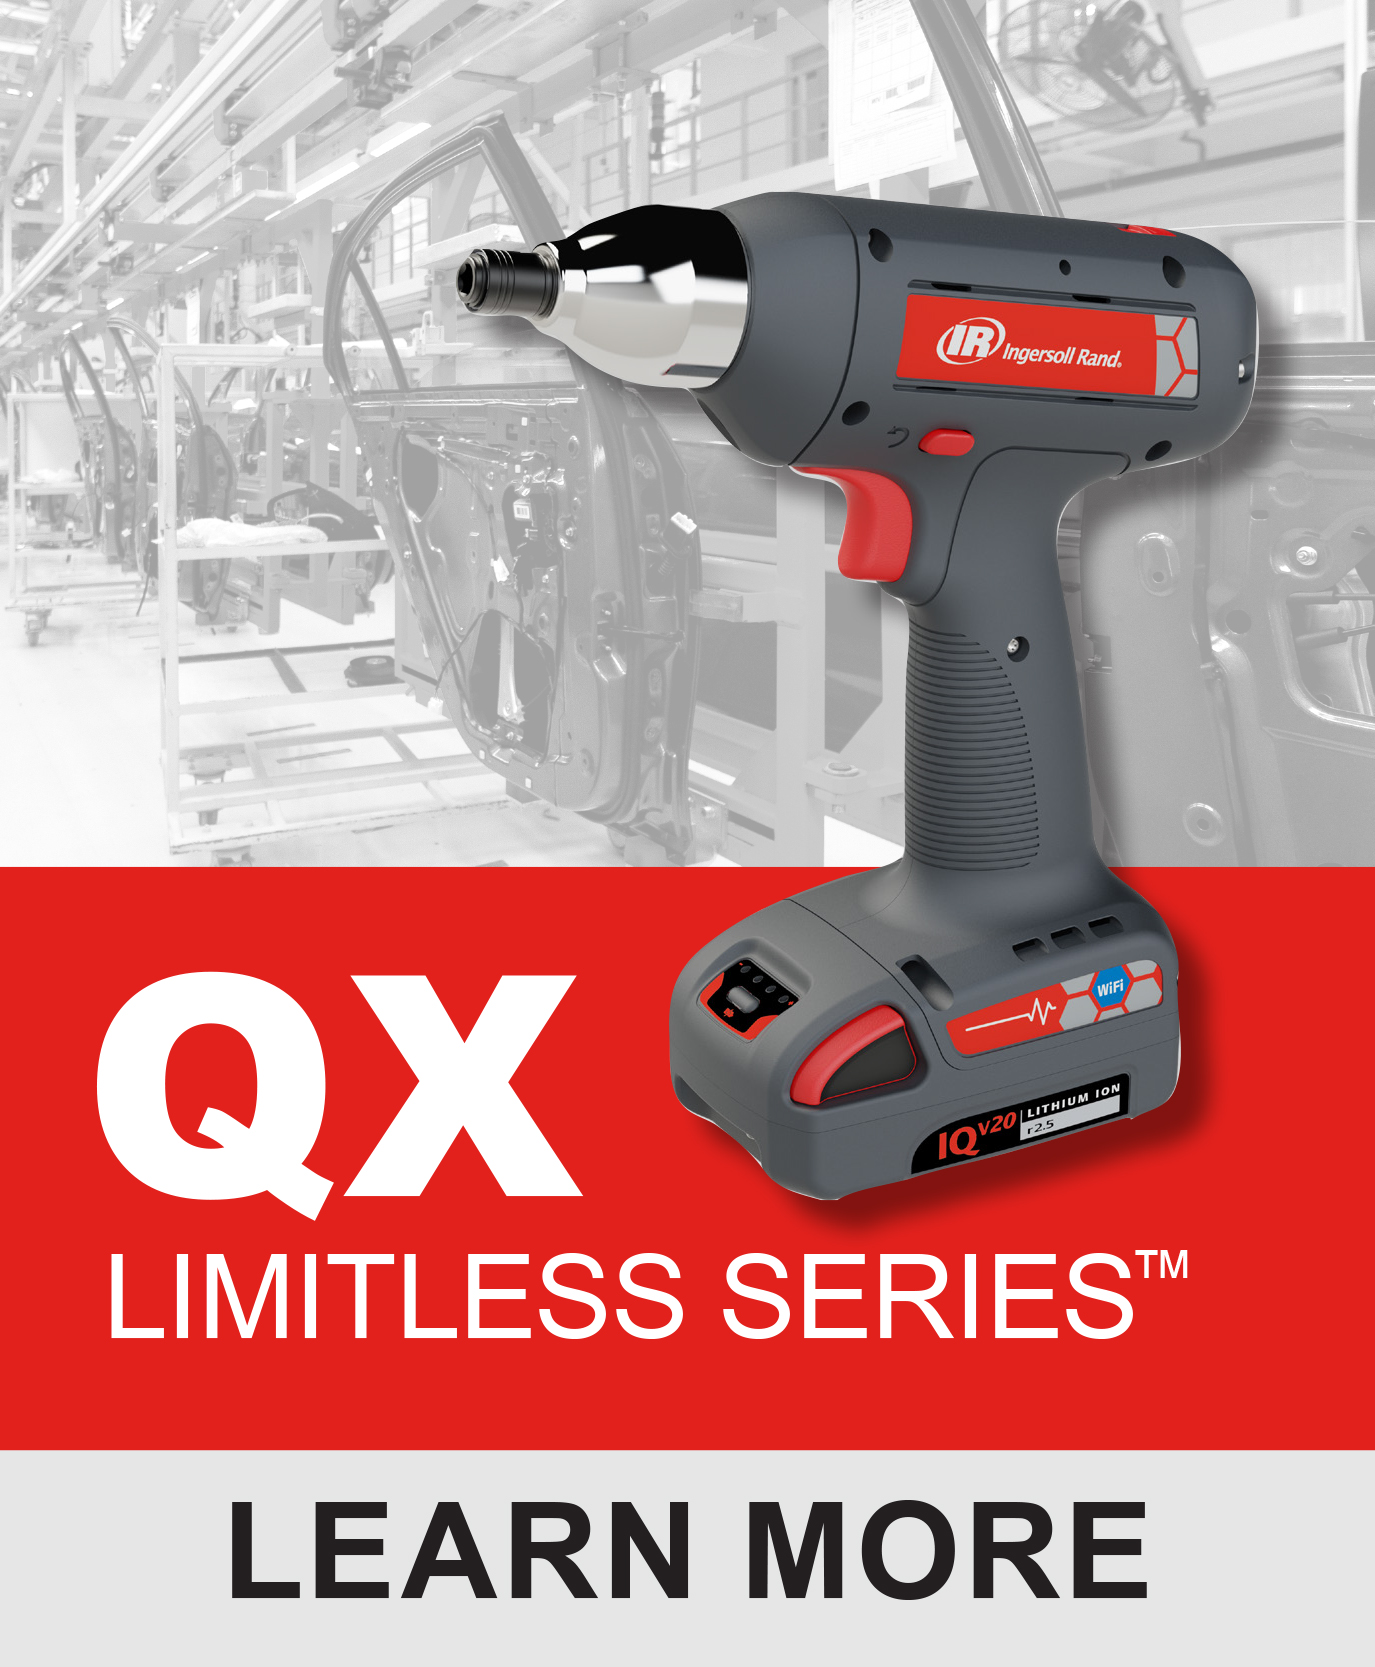 qx series limitless - fast, reliable, and smart tool system delivers greater control over your fastening processes